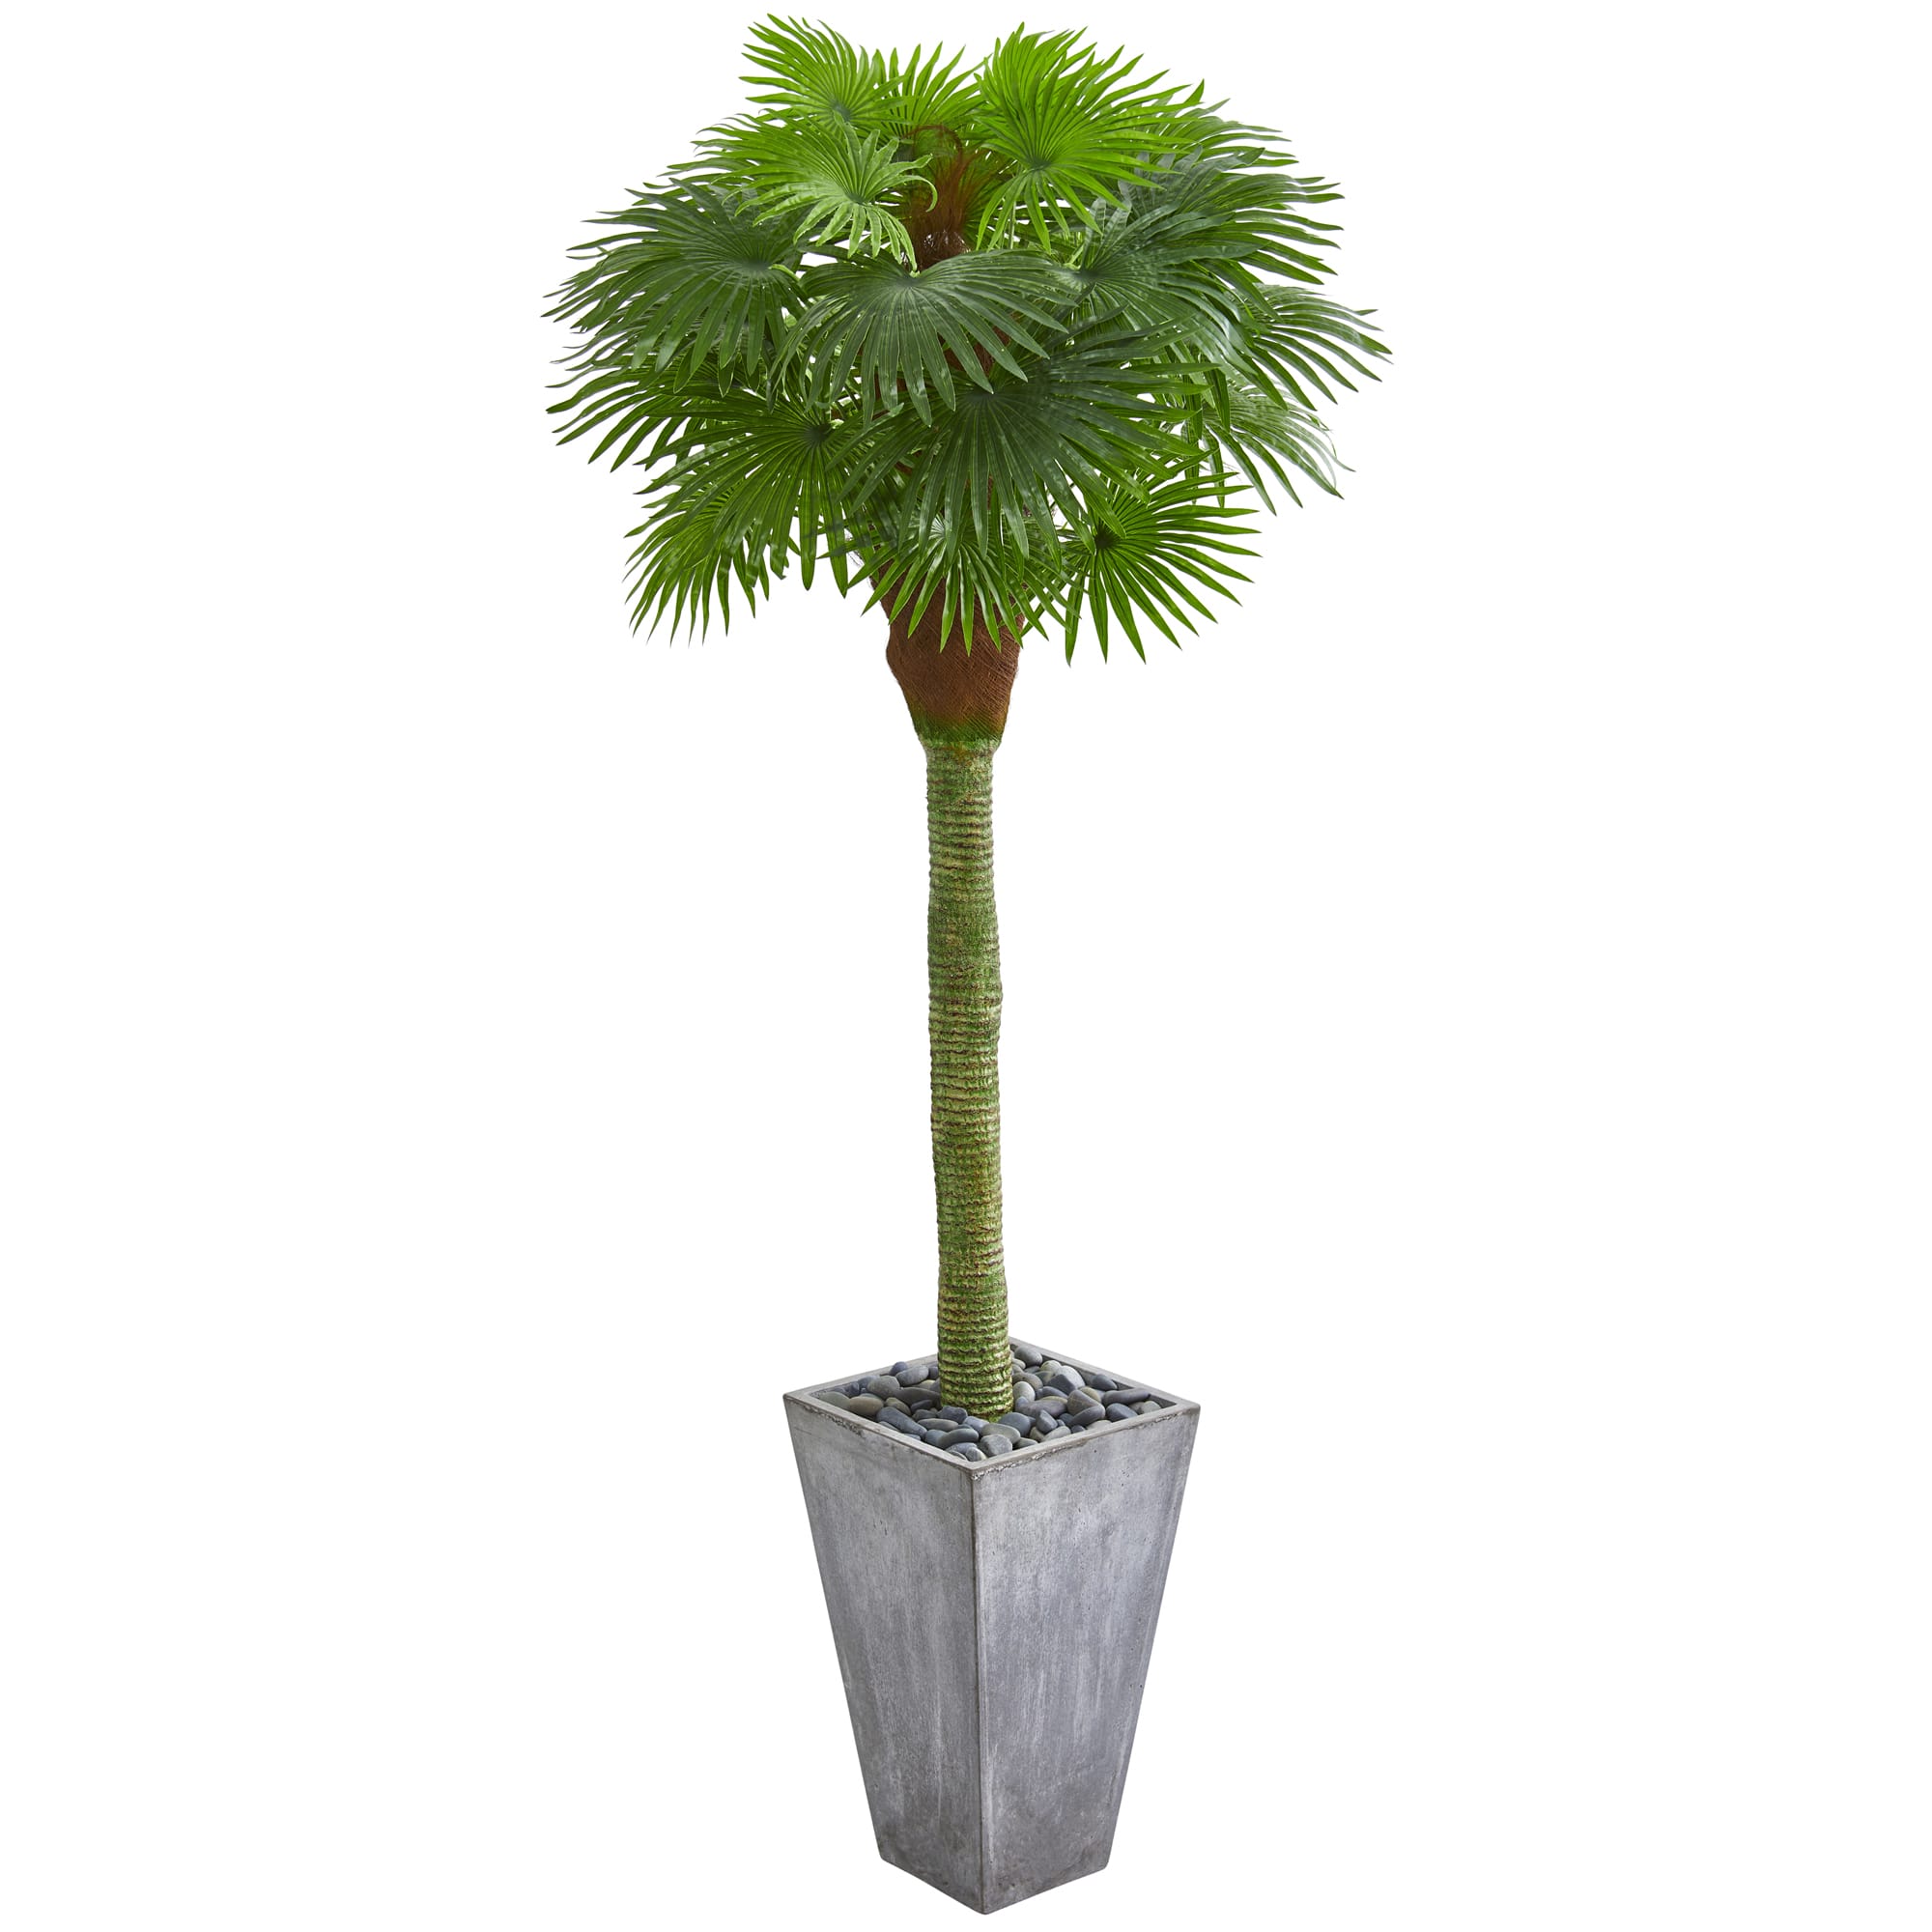 6.5ft. UV Resistant Fan Palm Artificial Tree in Cement Planter